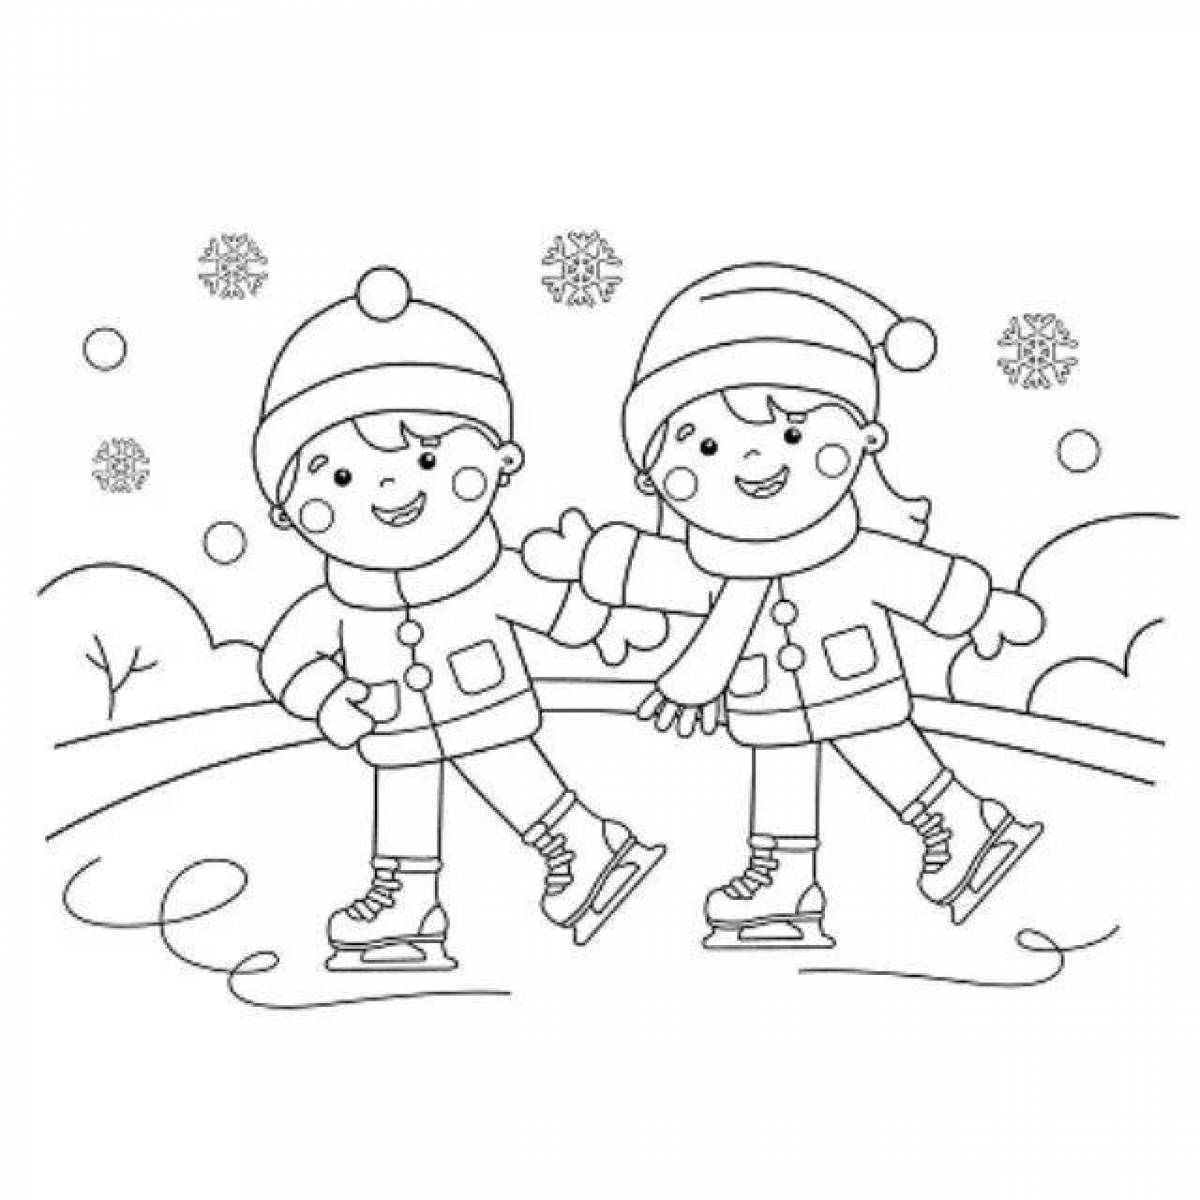 Shiny winter sports coloring book